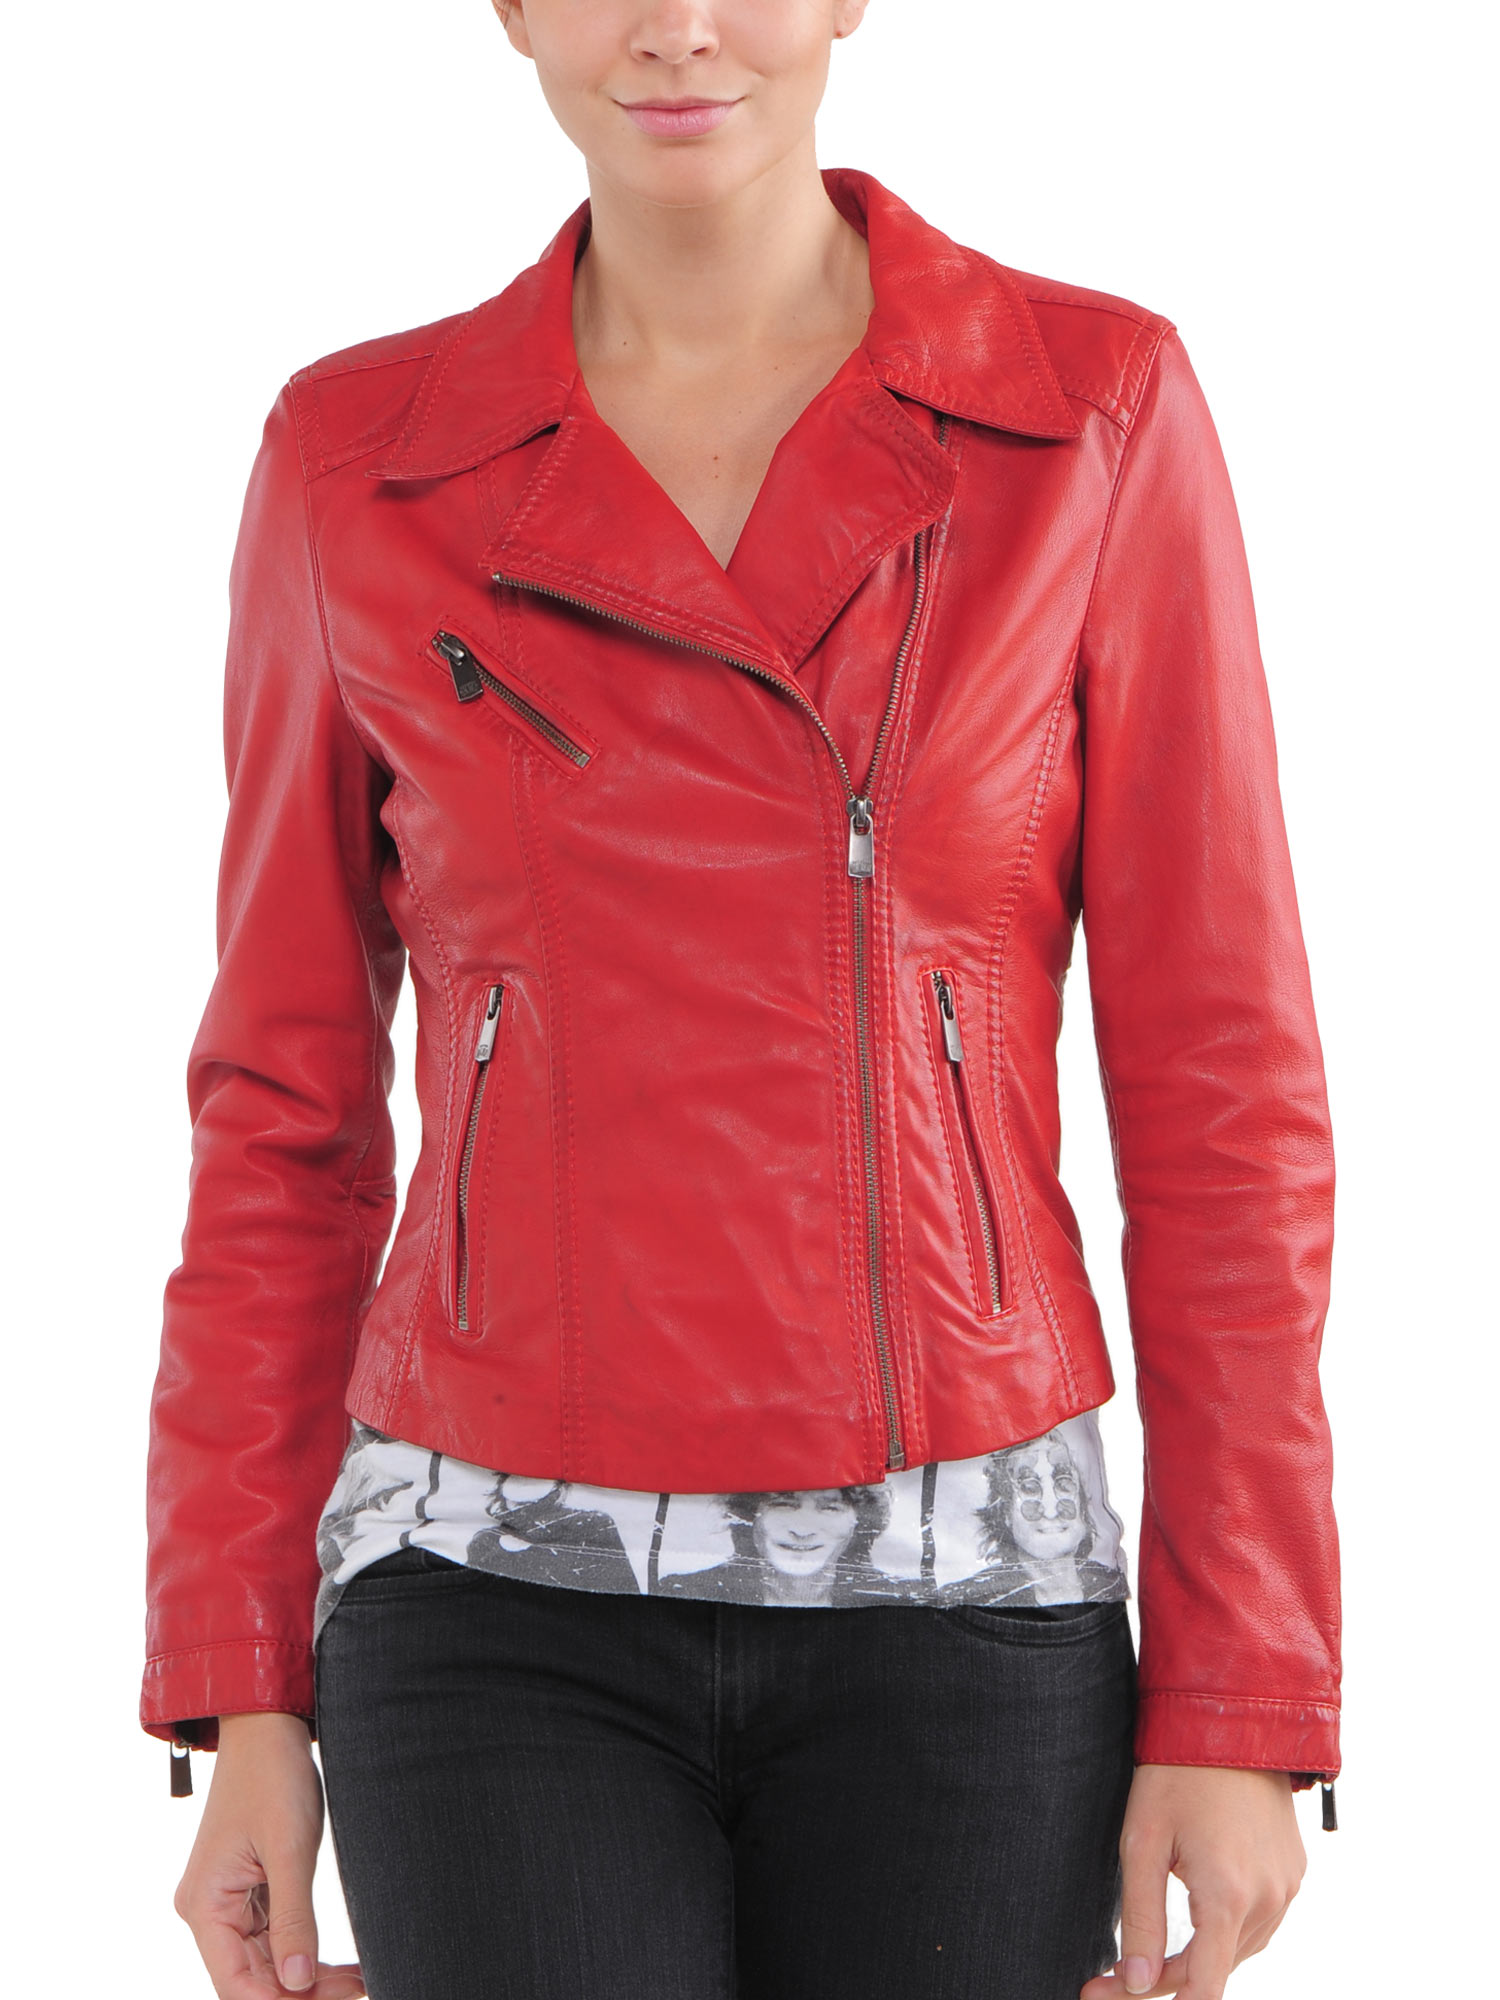 Red Jacket For Women - Jacket To